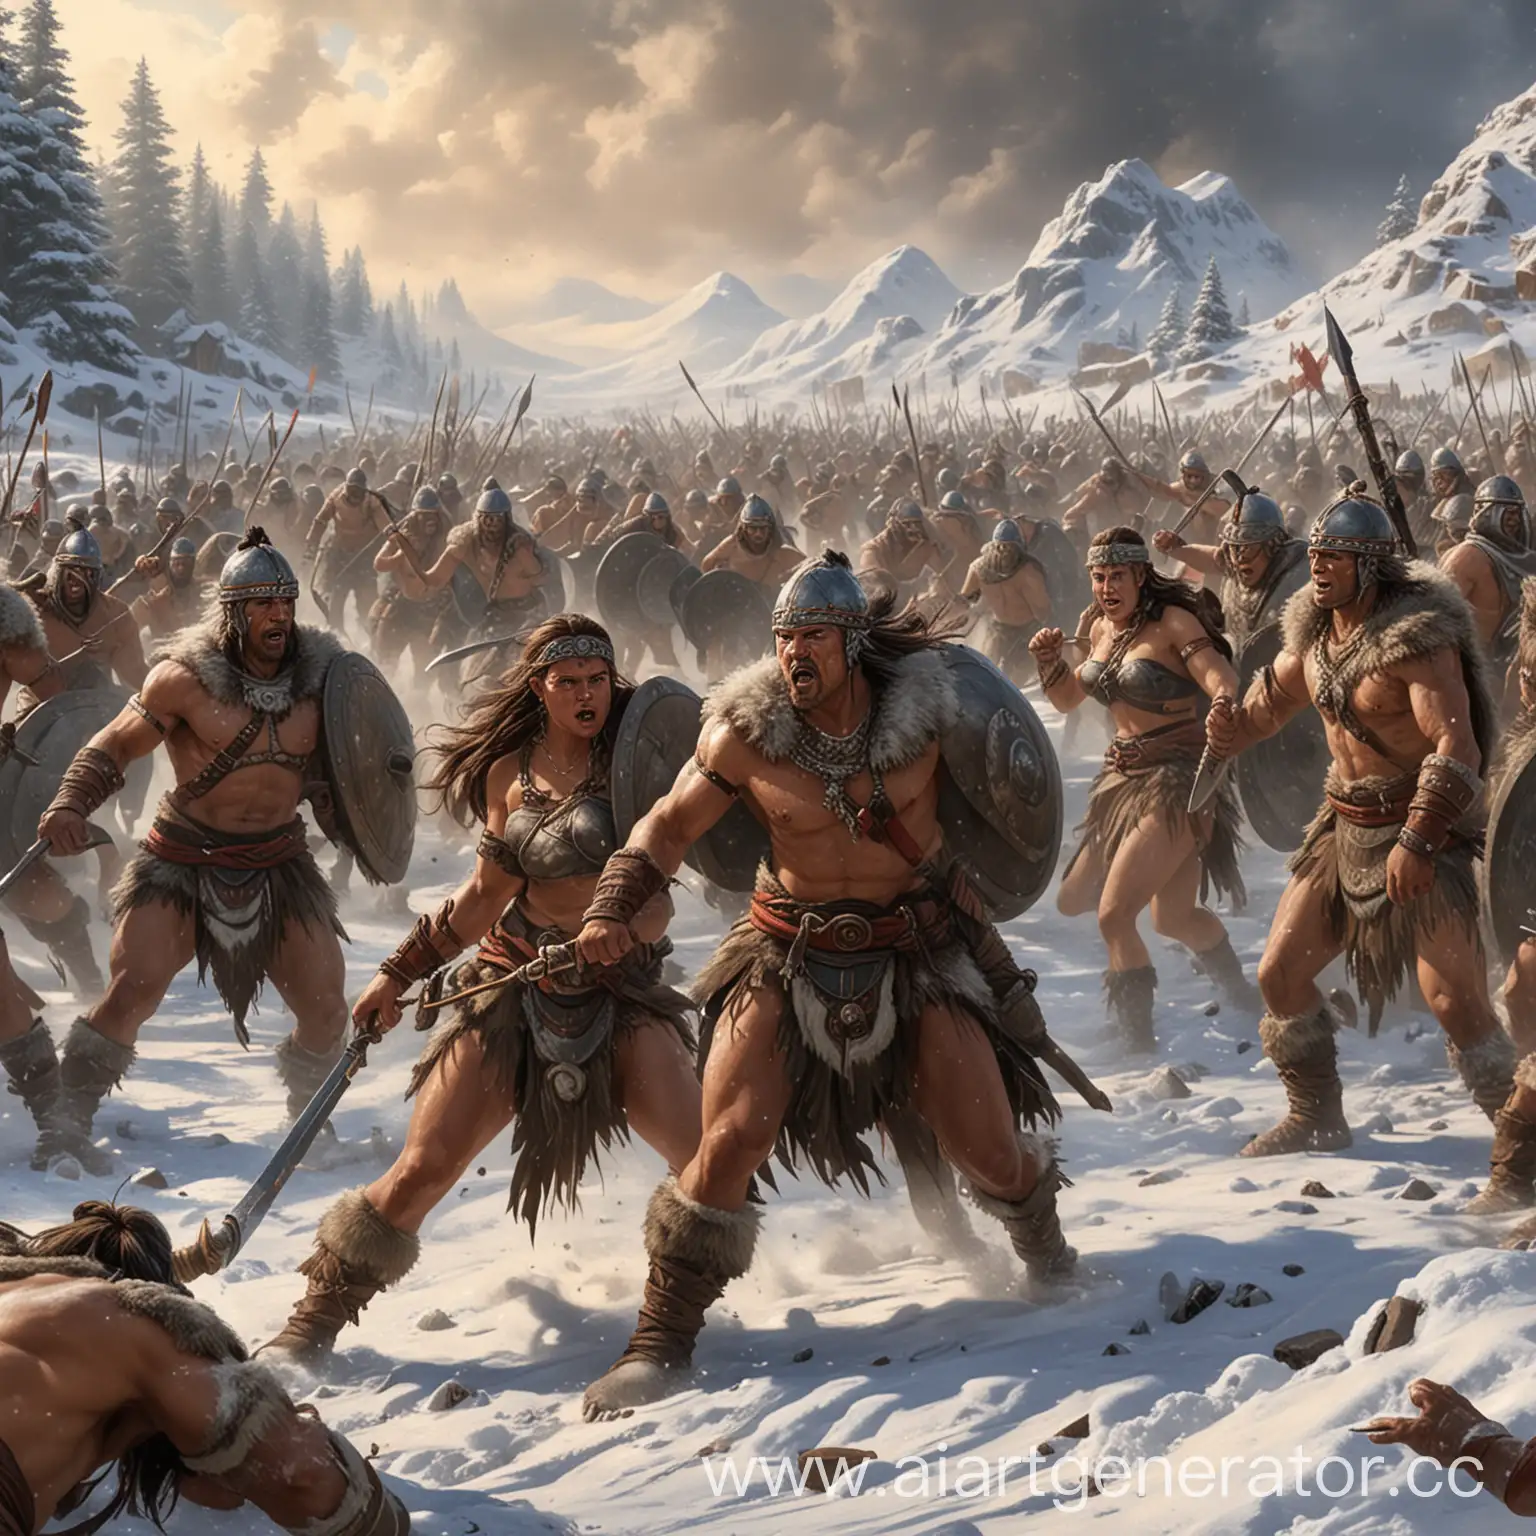 Epic-Battle-Mzhuki-Barbarians-vs-Amazons-in-the-Snowy-City